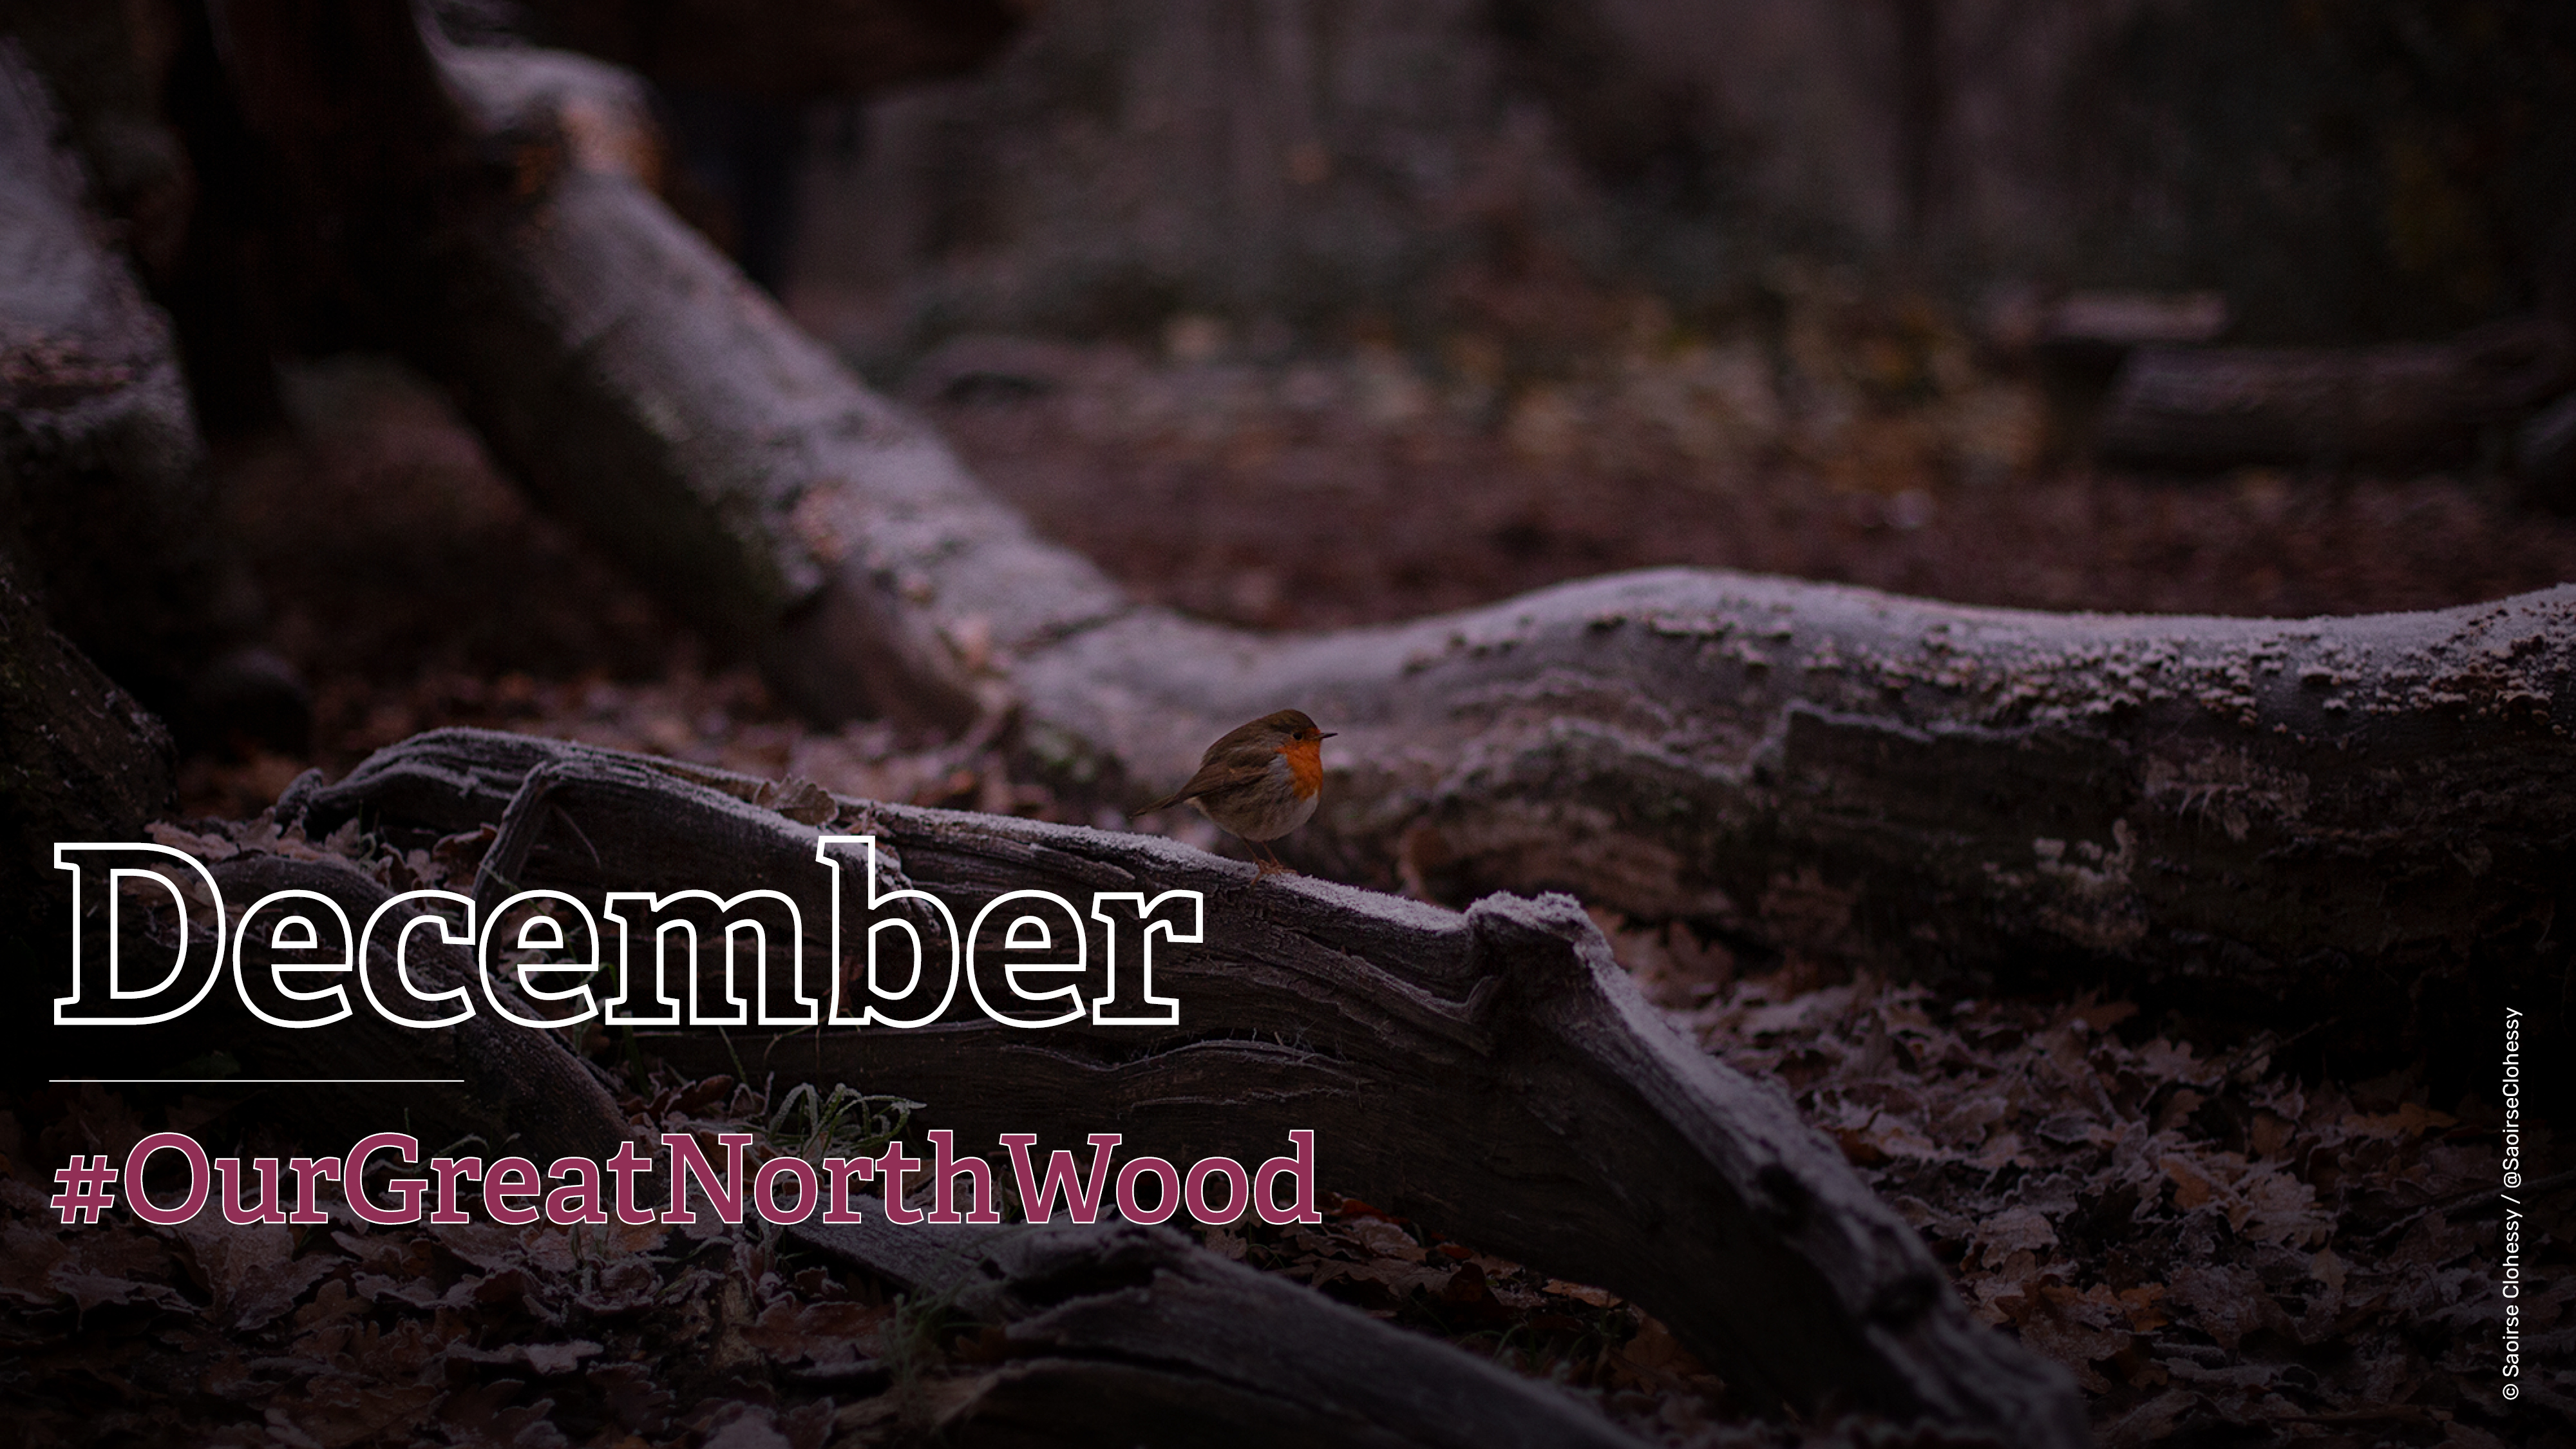 Great North Wood - December